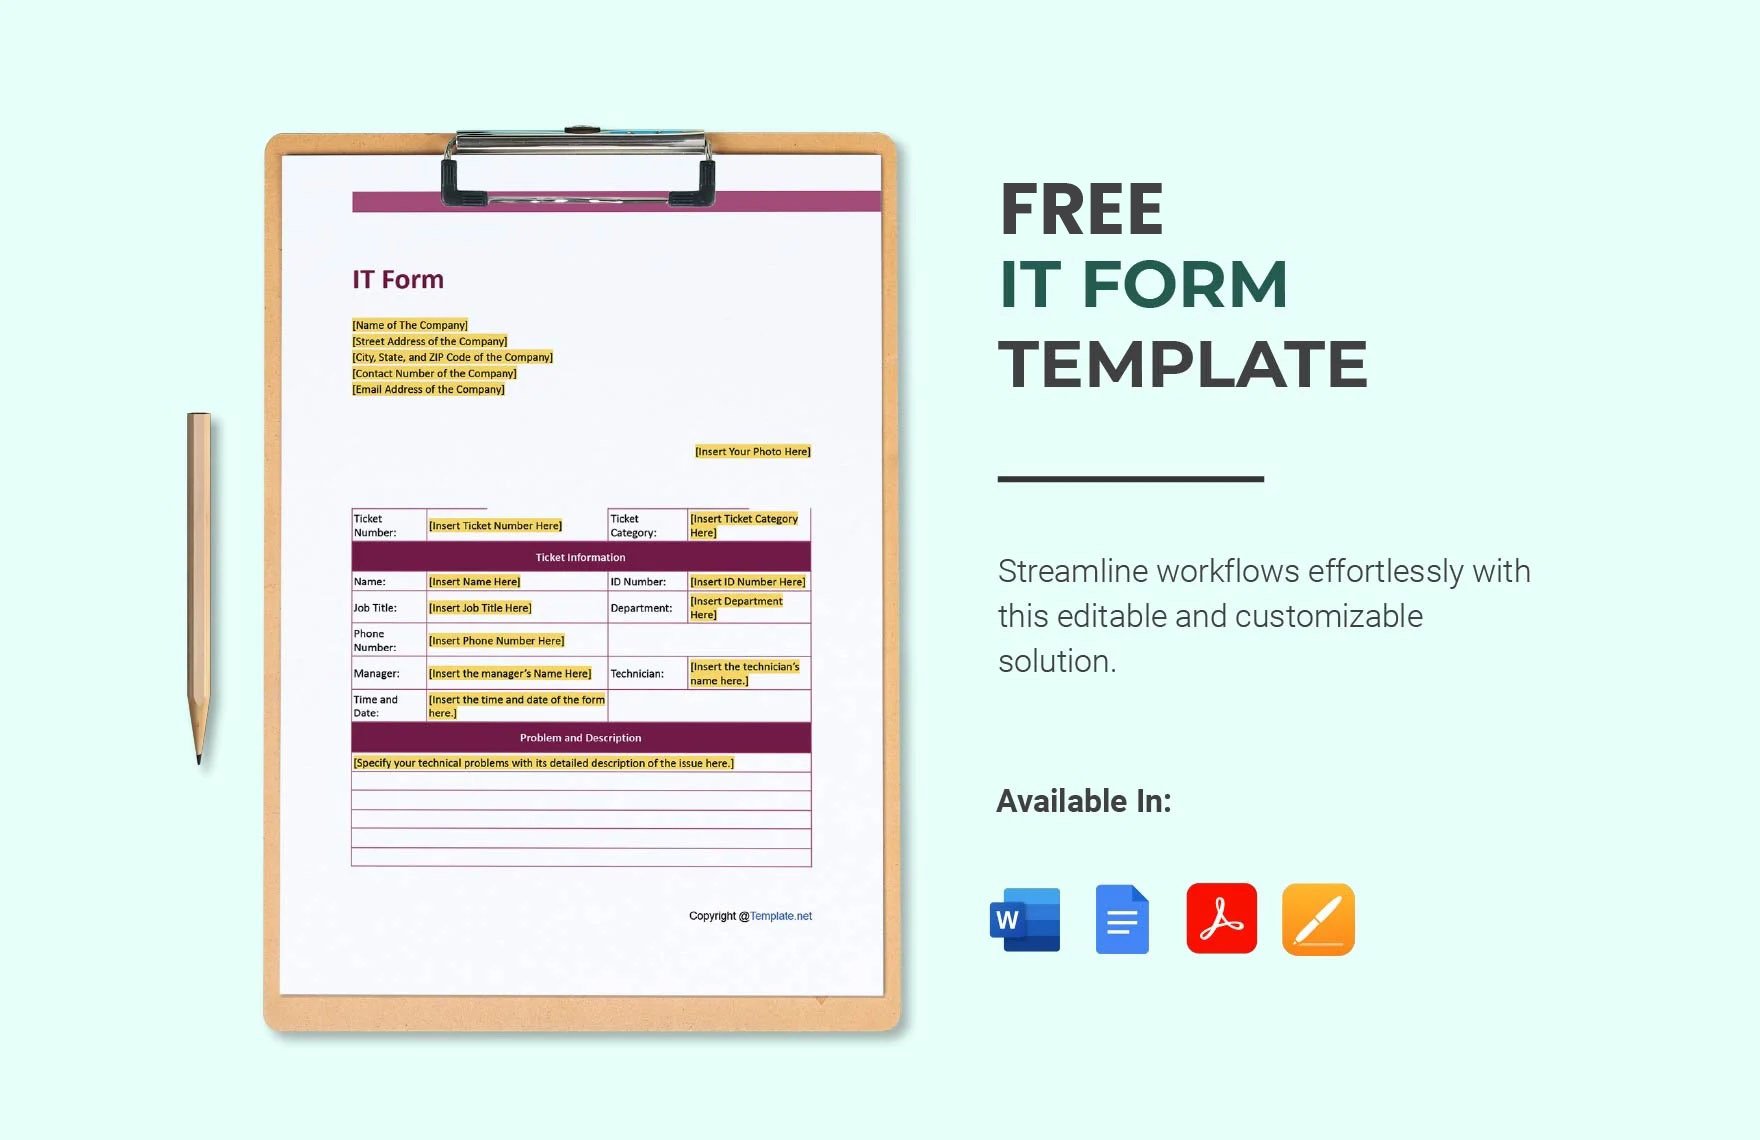 Free IT Form Template